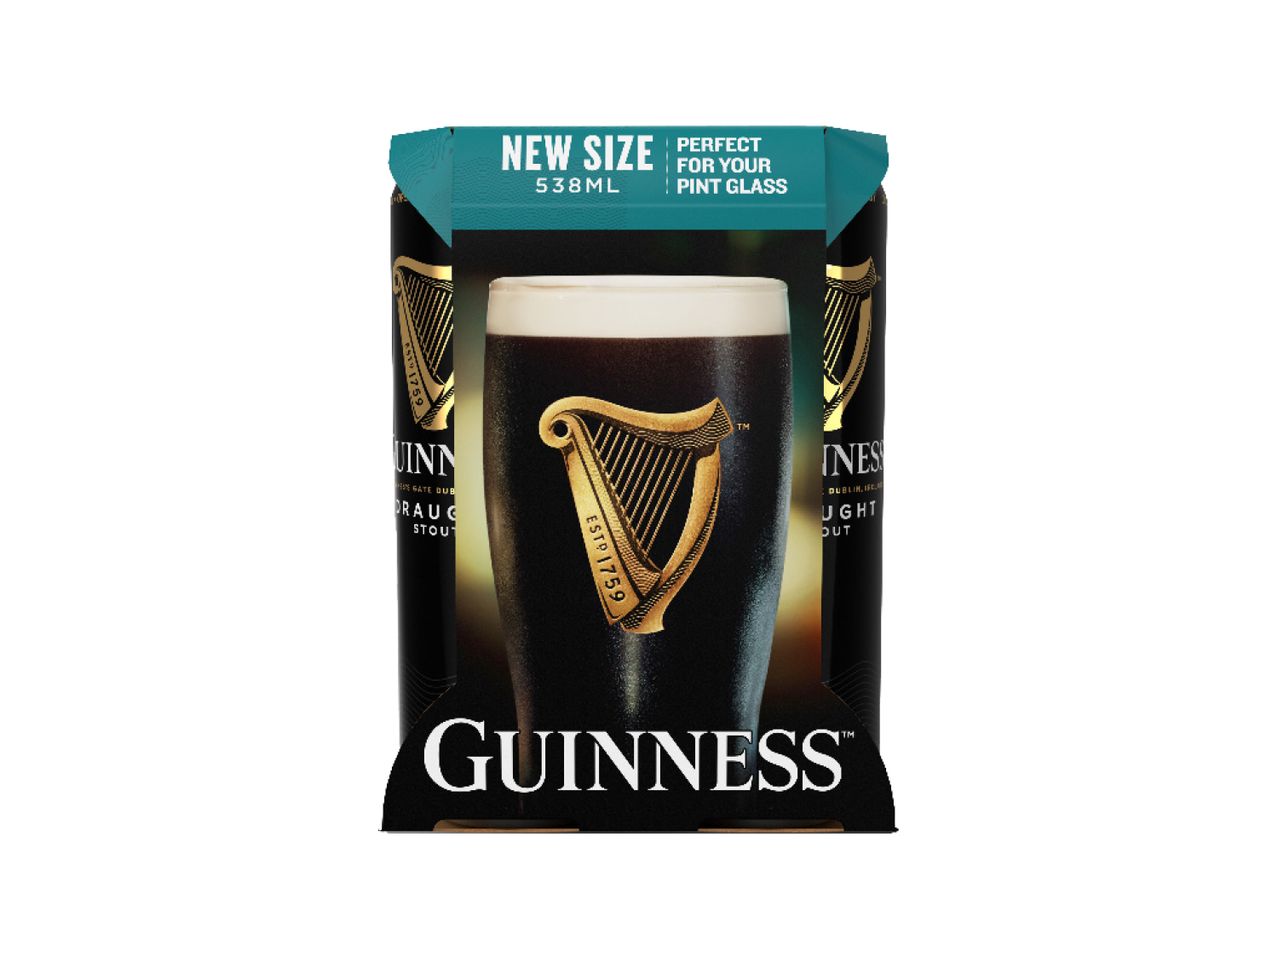 Go to full screen view: Guiness Draught Stout - Image 1